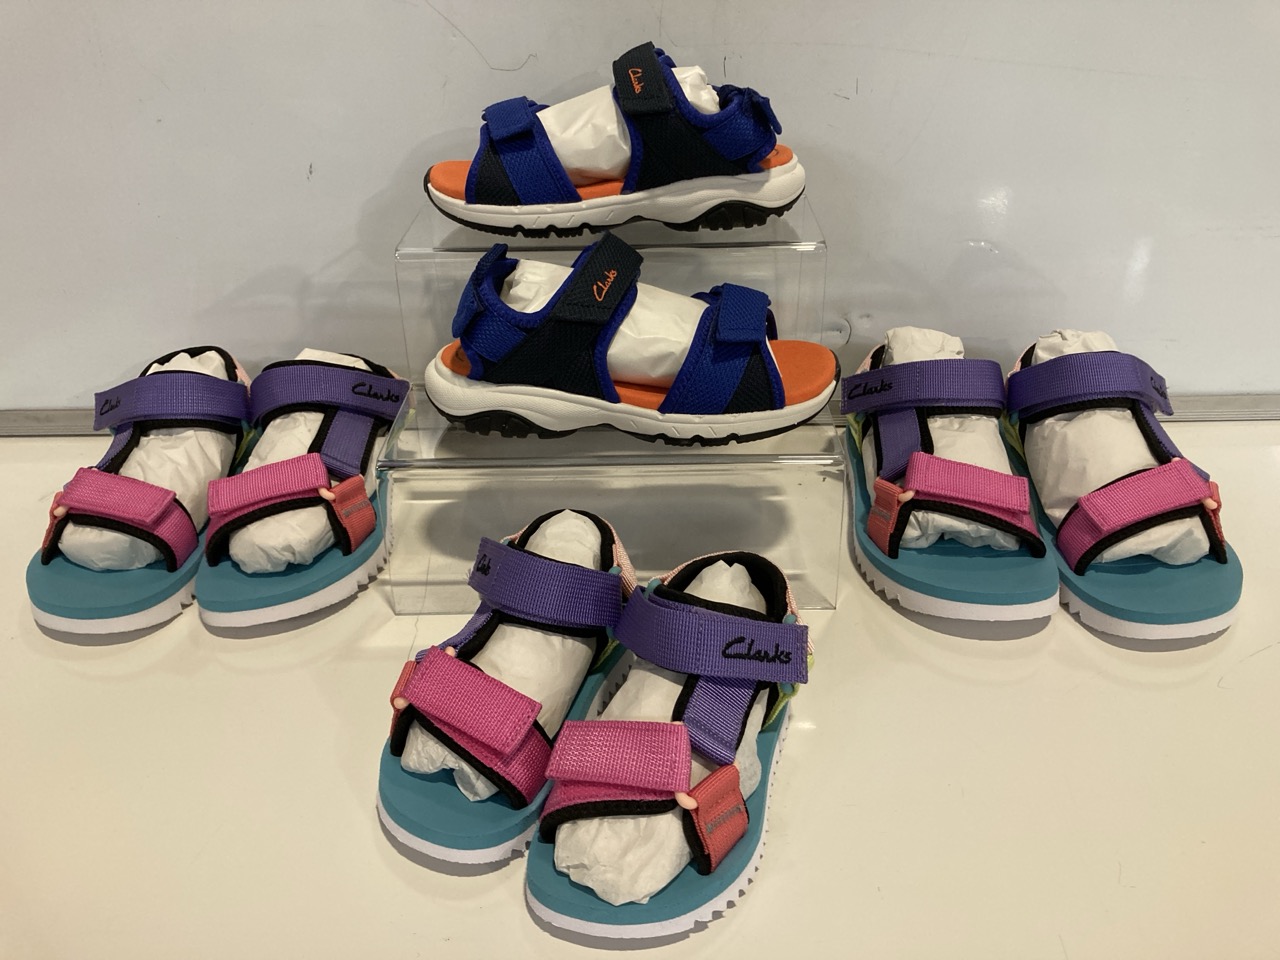 4 X PAIRS OF CLARKS CHILDREN'S FOOTWEAR TO INCLUDE CLARKS PEAK WEB O MULTI COLOR SANDALS IN SIZE 13.5 UK